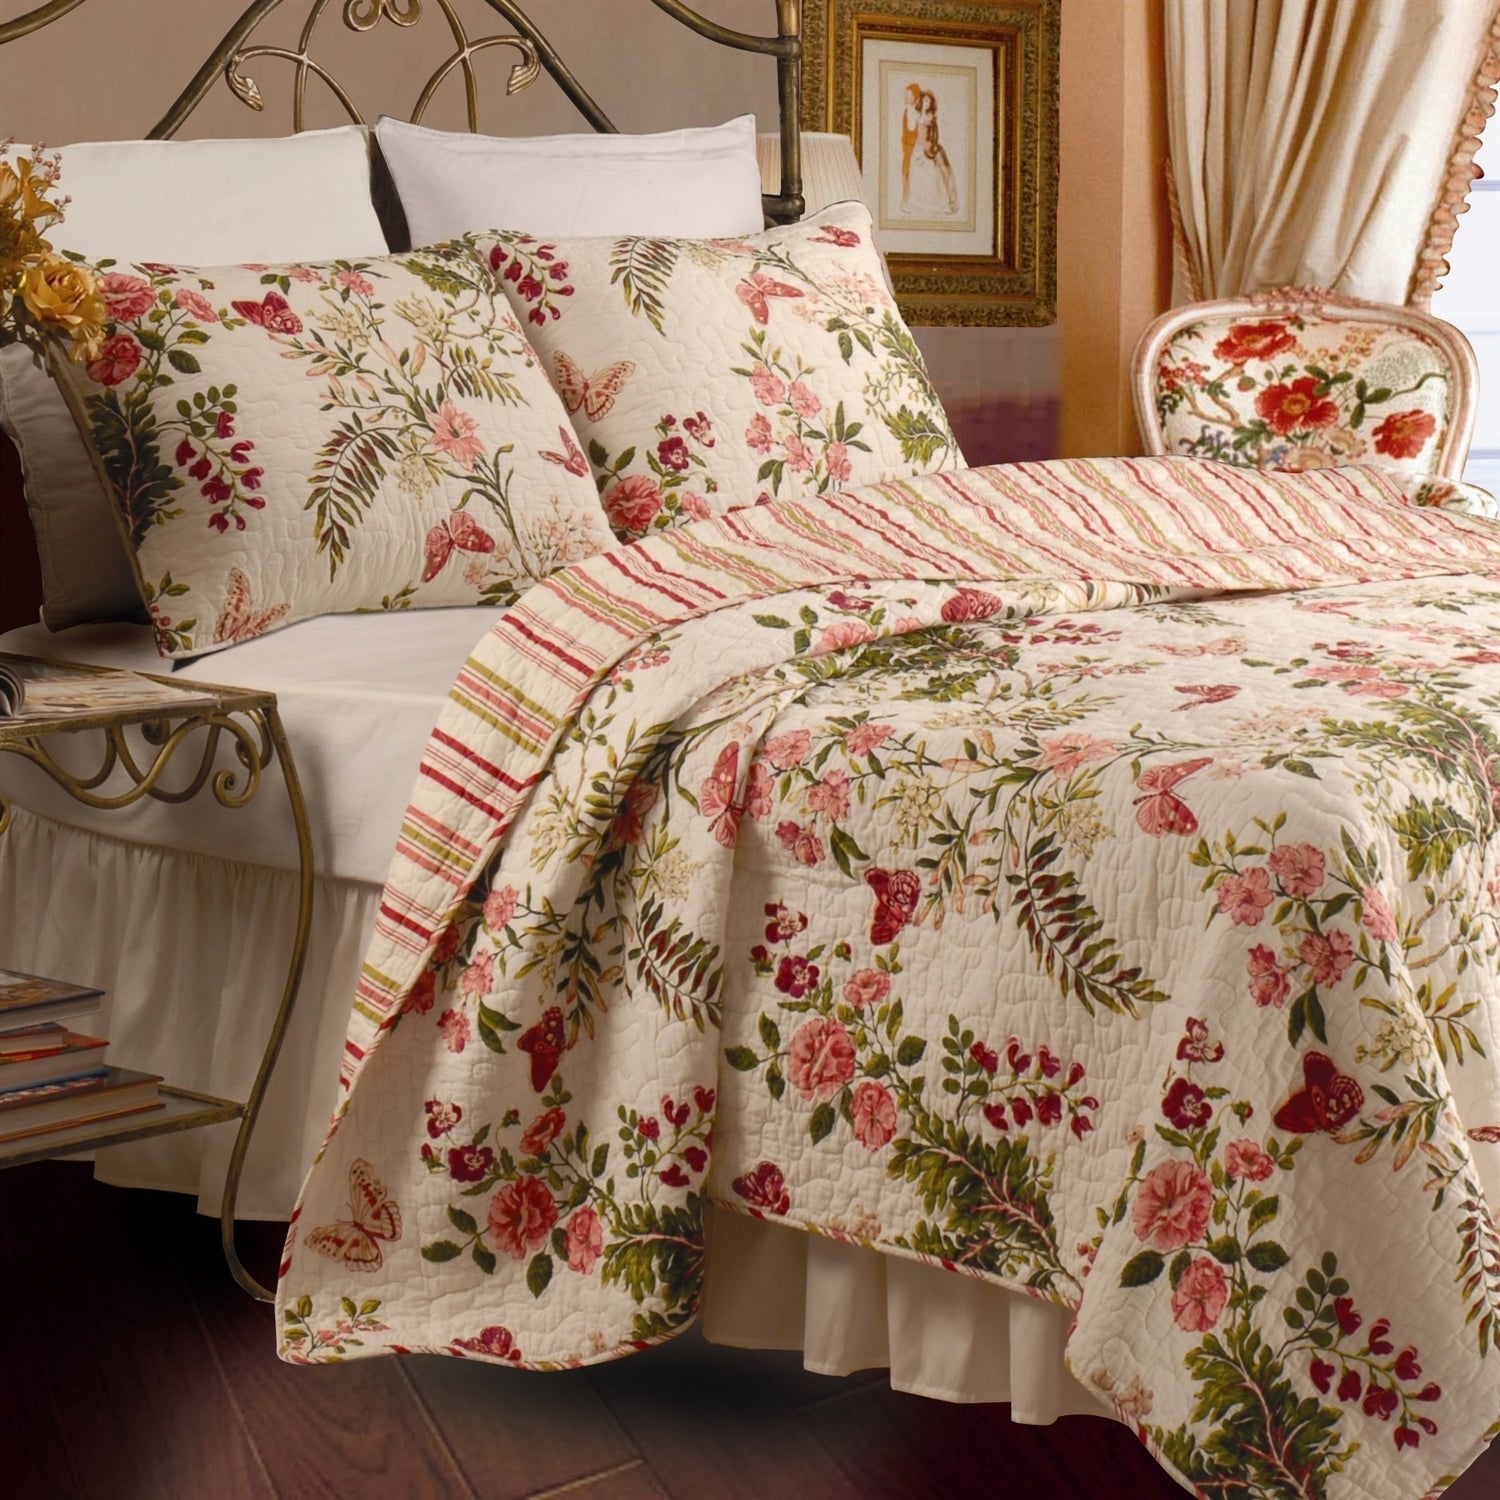 Bedroom > Quilts & Blankets - King Size 3-Piece Cotton Quilt Set In Pink Beige Floral Butterflies